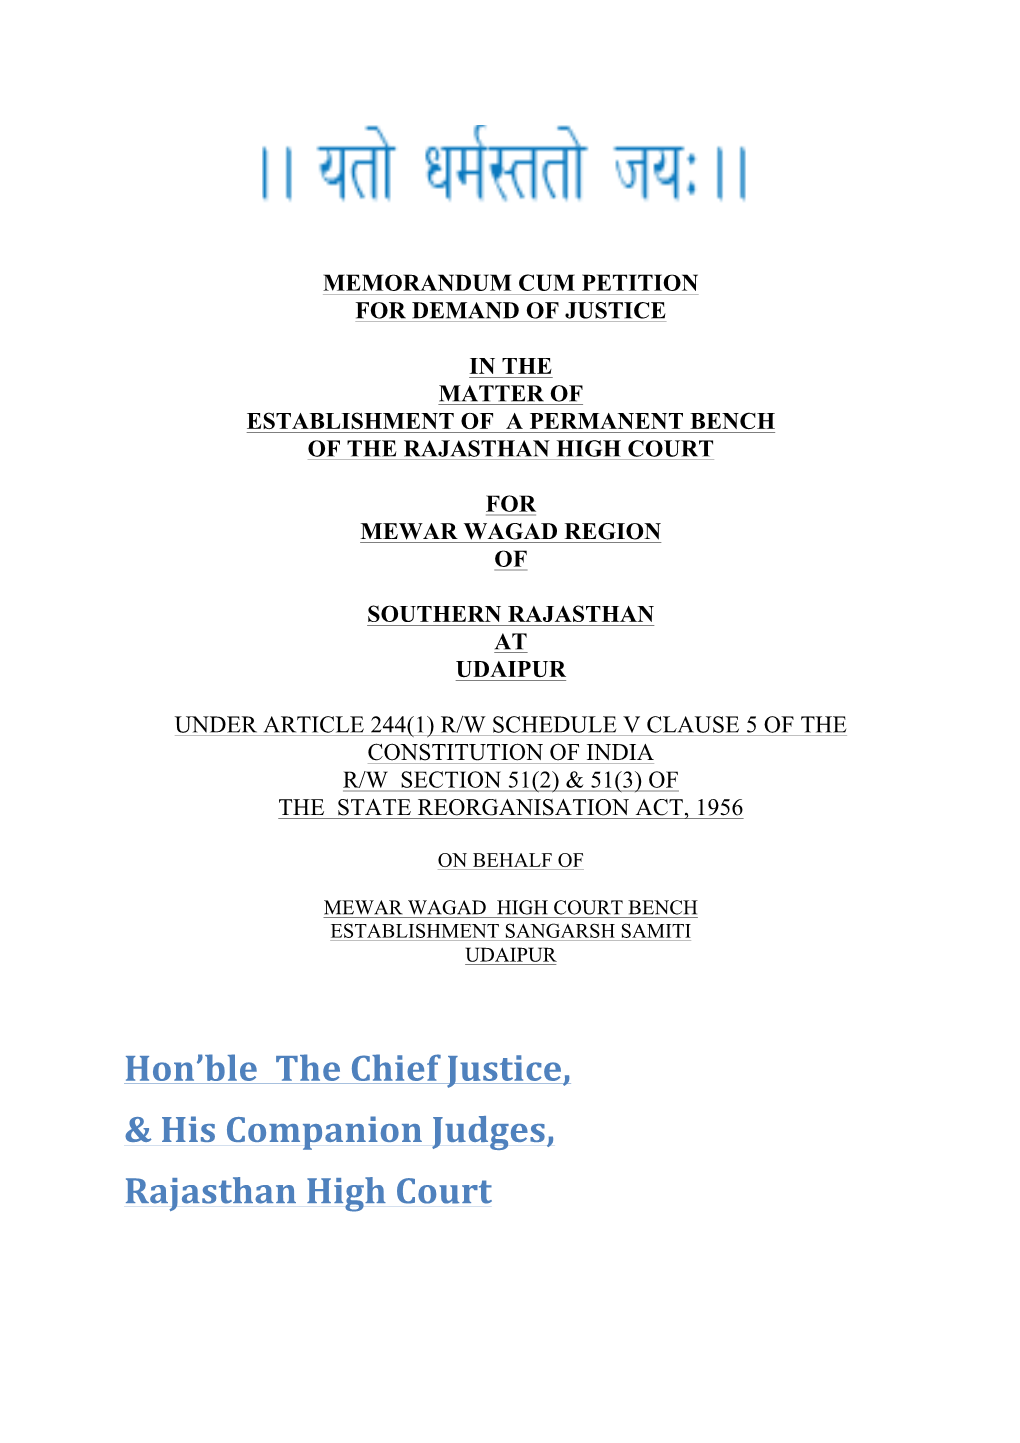 Hon'ble the Chief Justice, & His Companion Judges, Rajasthan